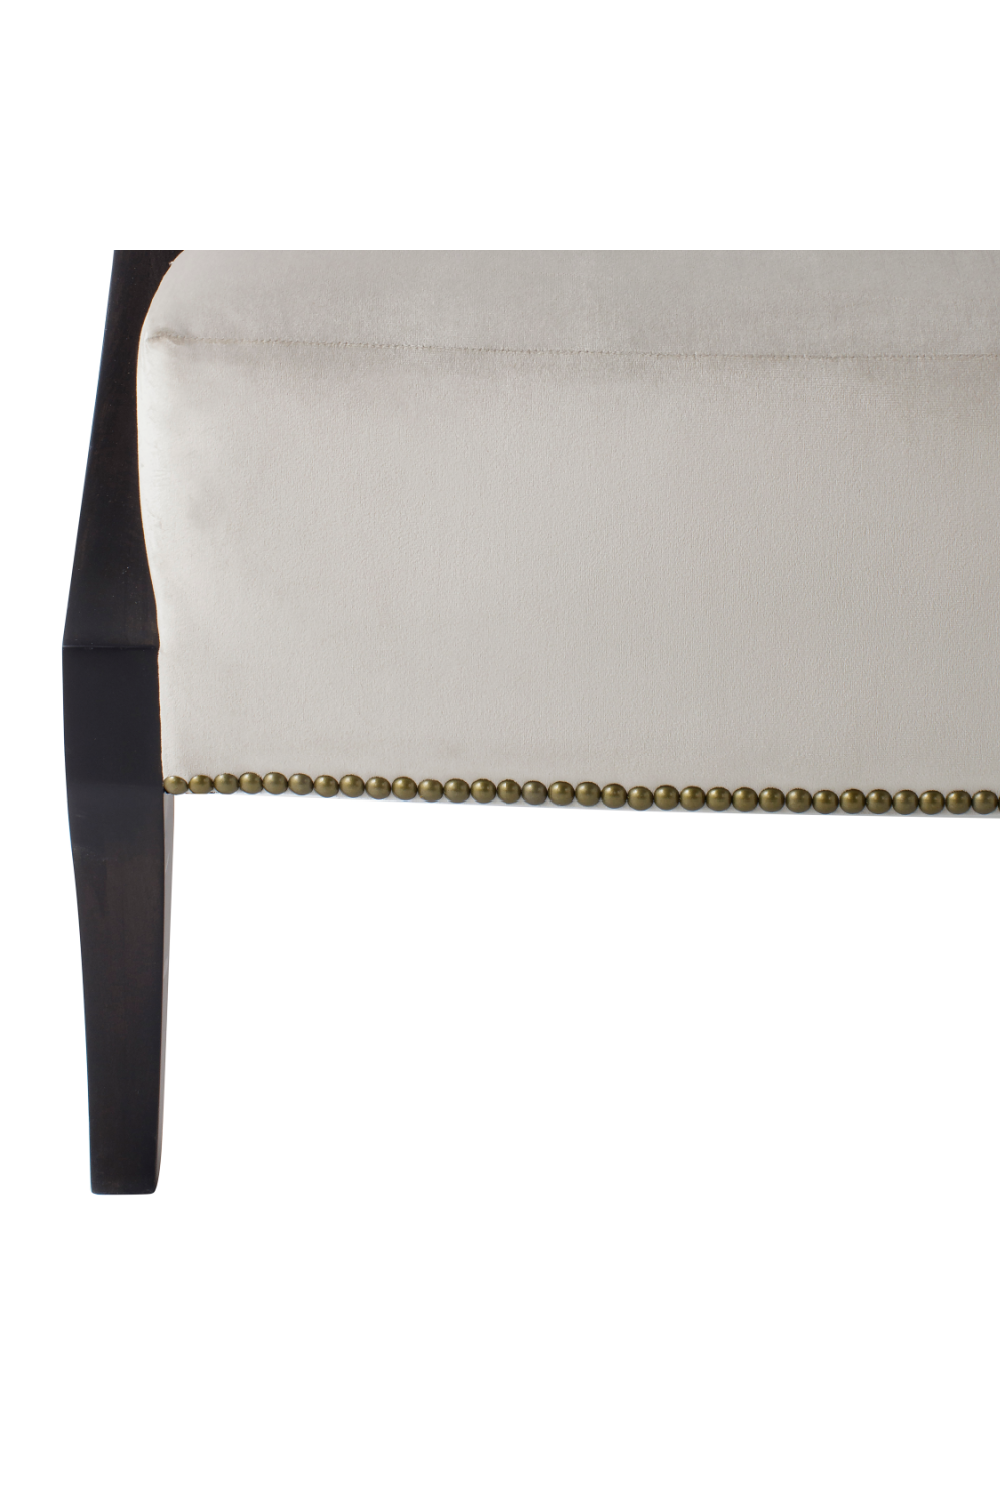 Off White Studded Accent Chair | Andrew Martin Evelyn Chair | OROA